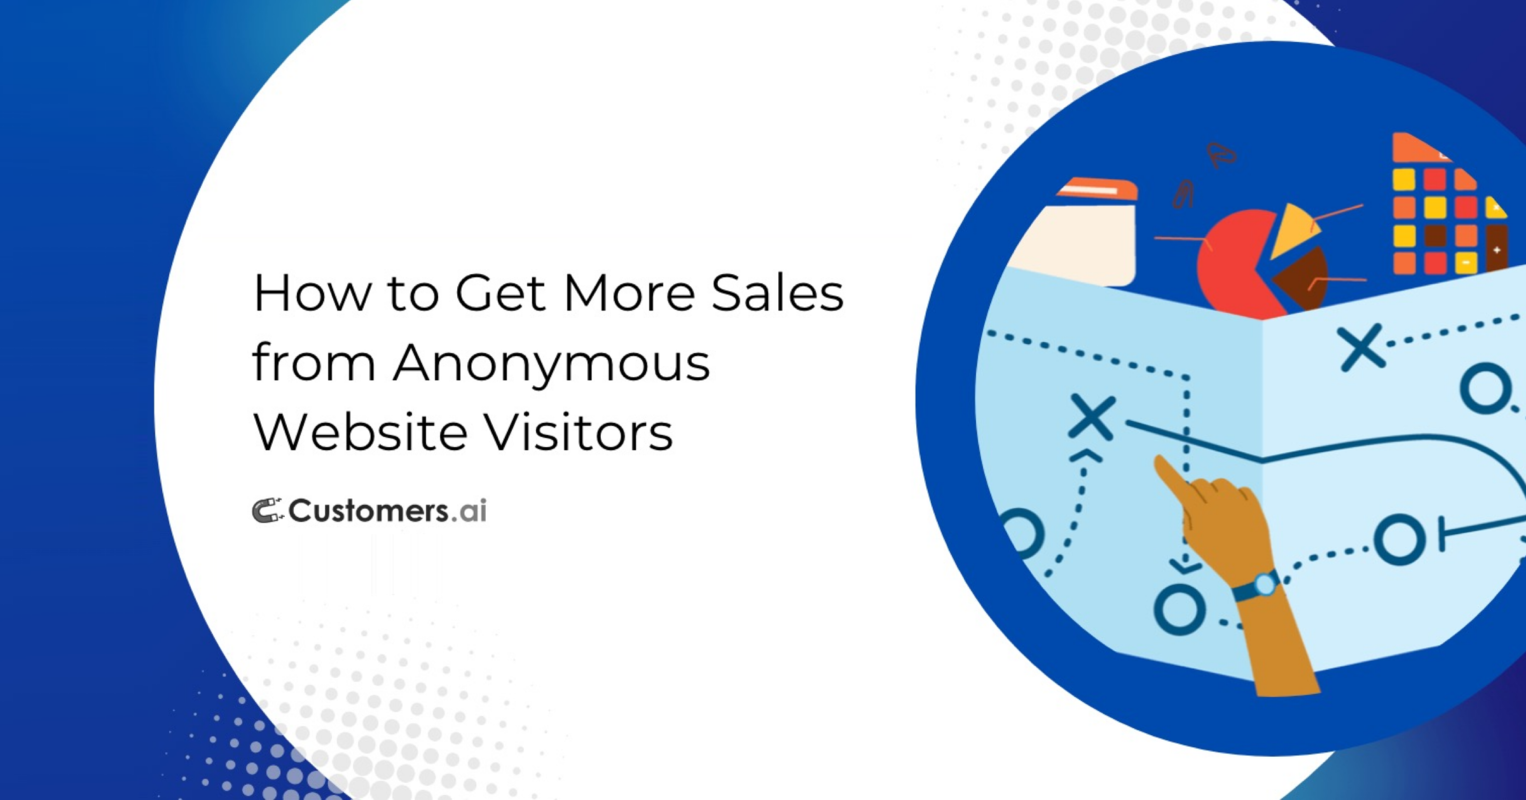 anonymous website visitors playbook for sales